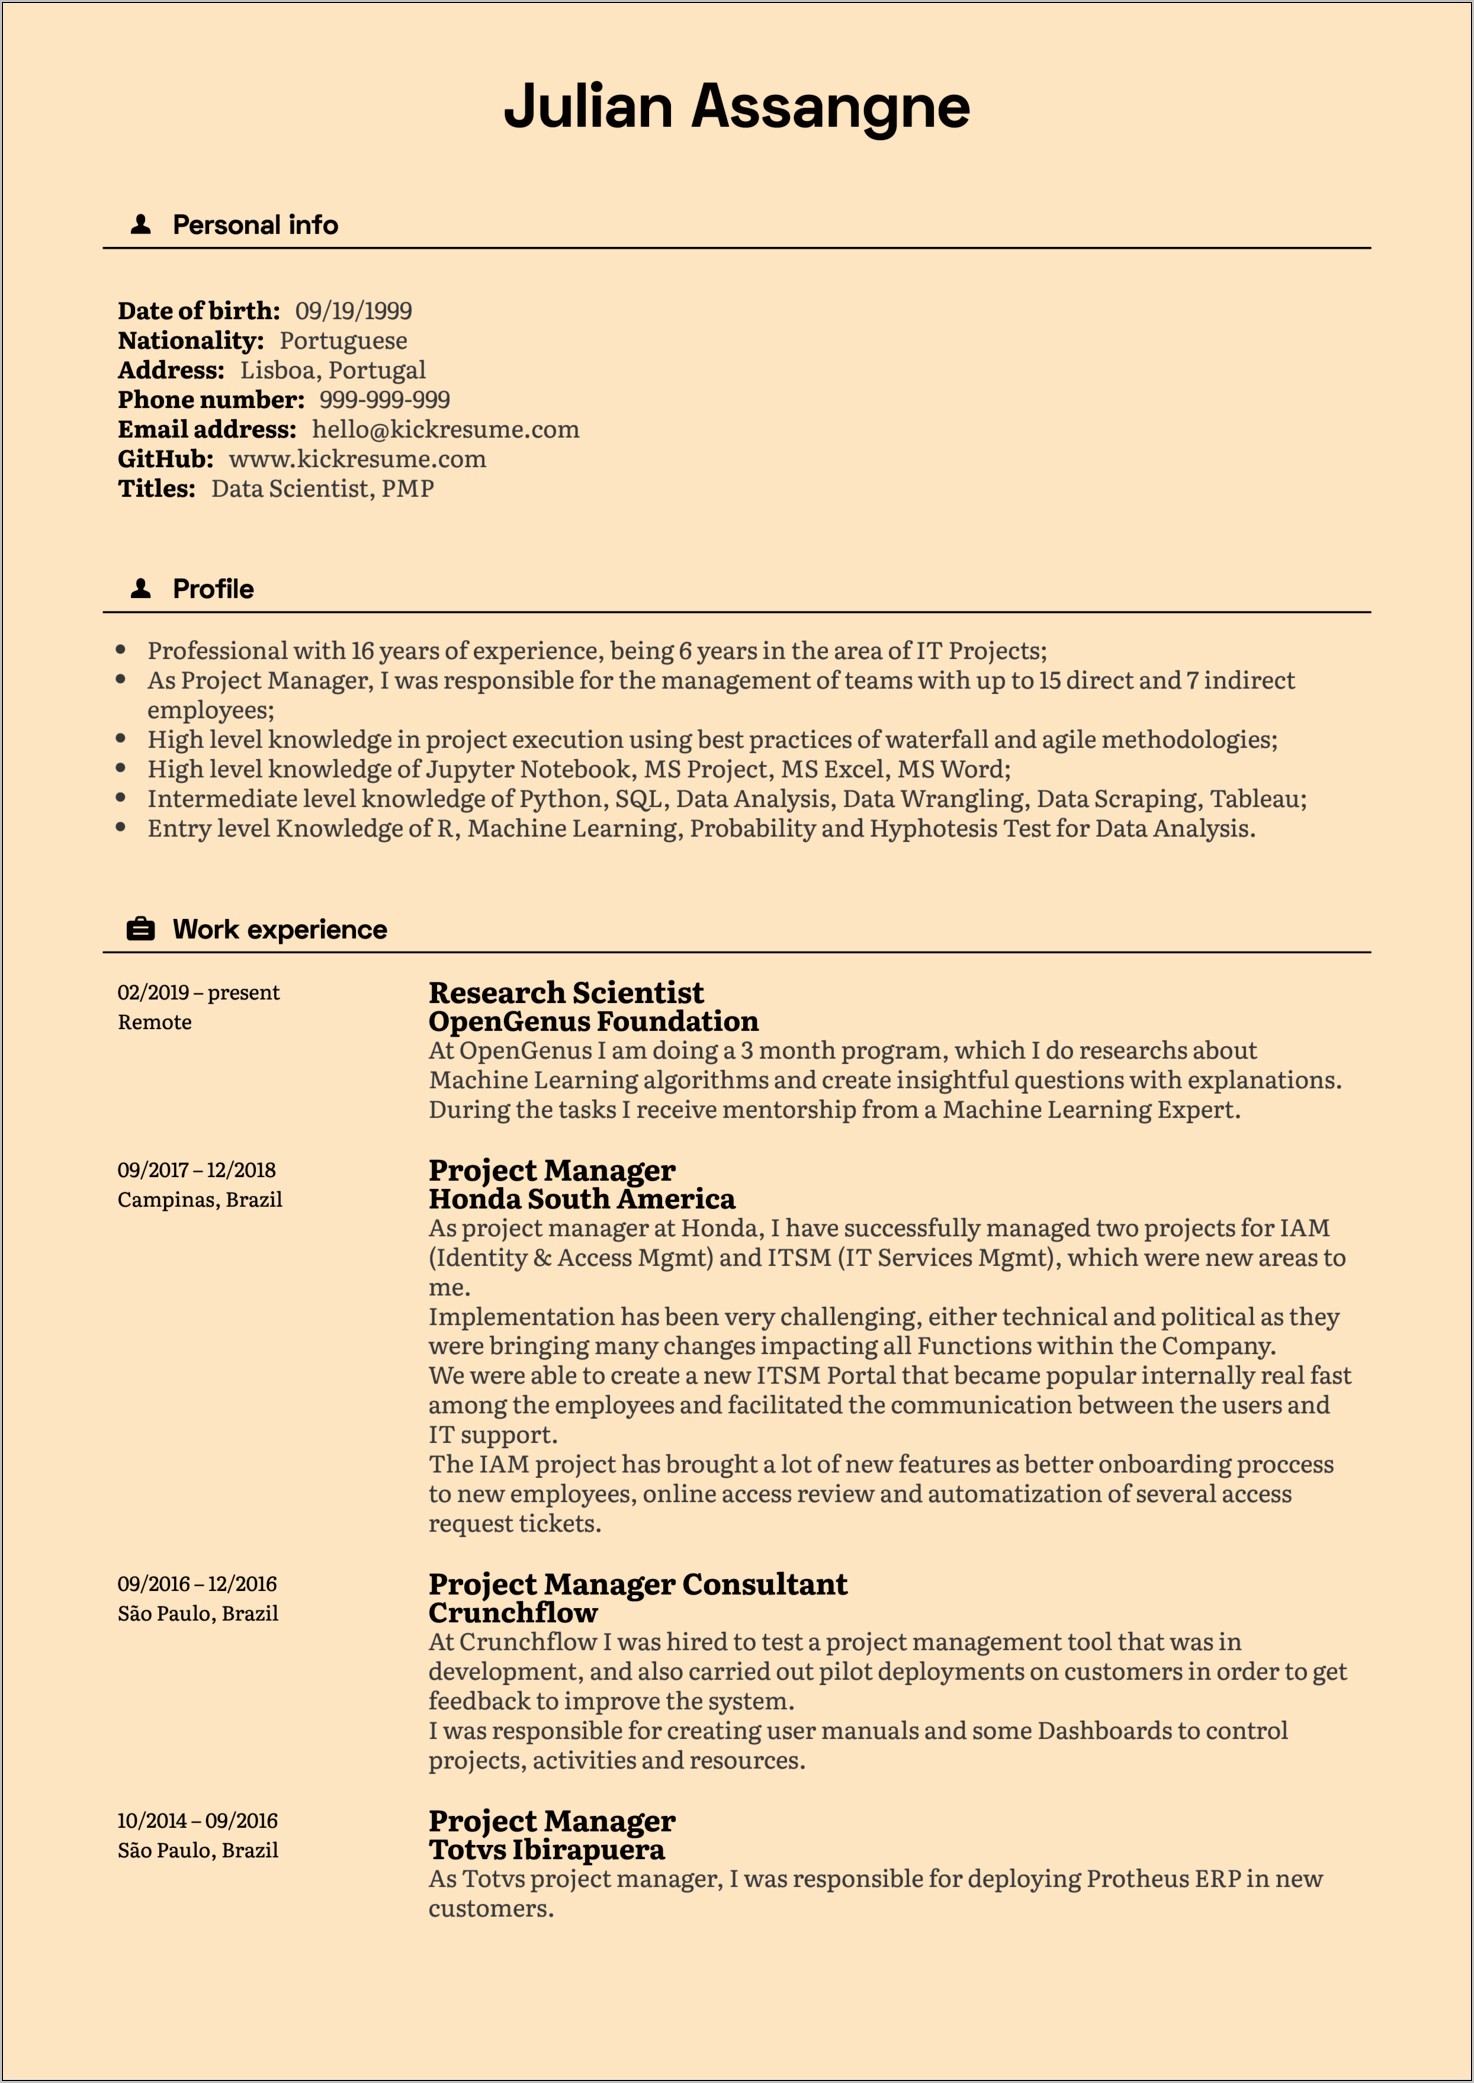 Resume Description Project Manager Consultant